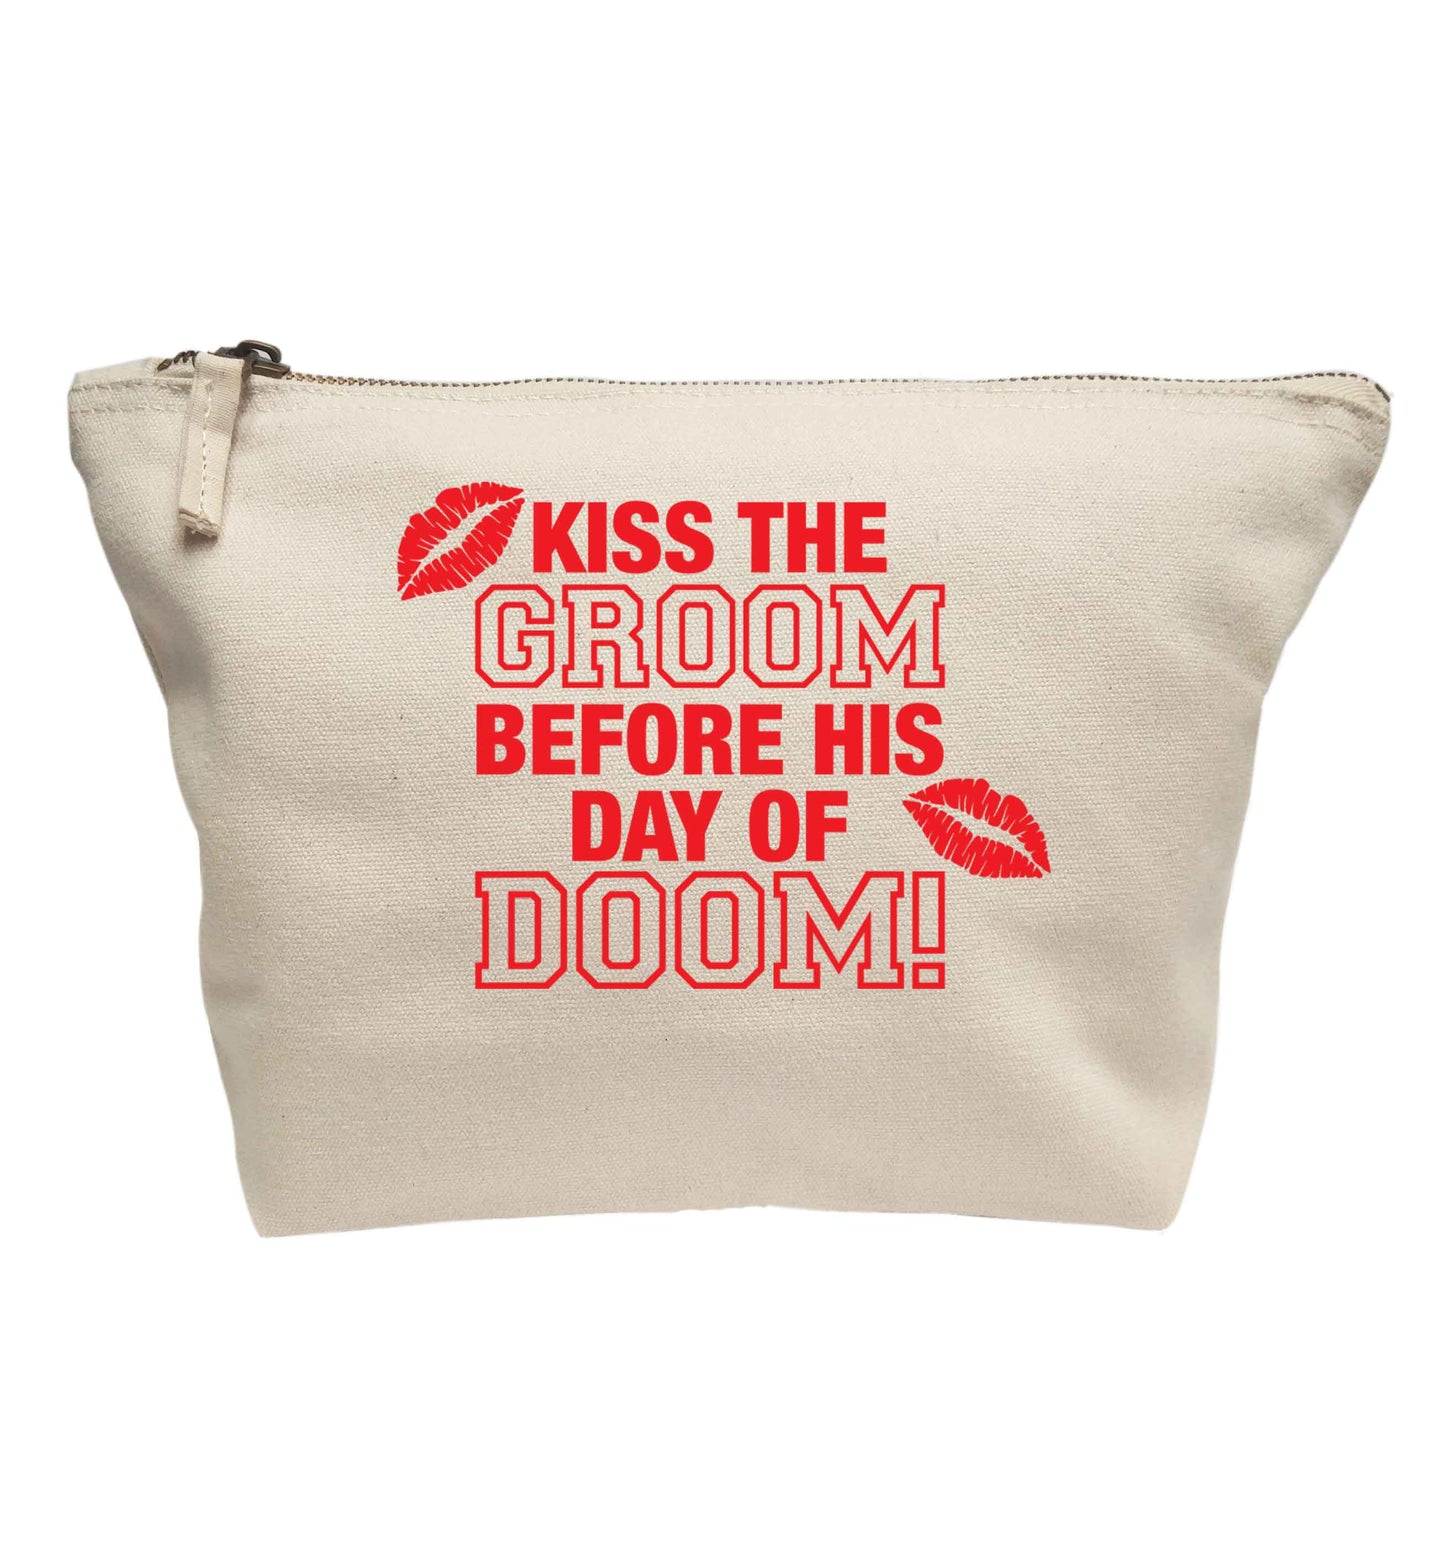 Kiss the groom before his day of doom! | makeup / wash bag